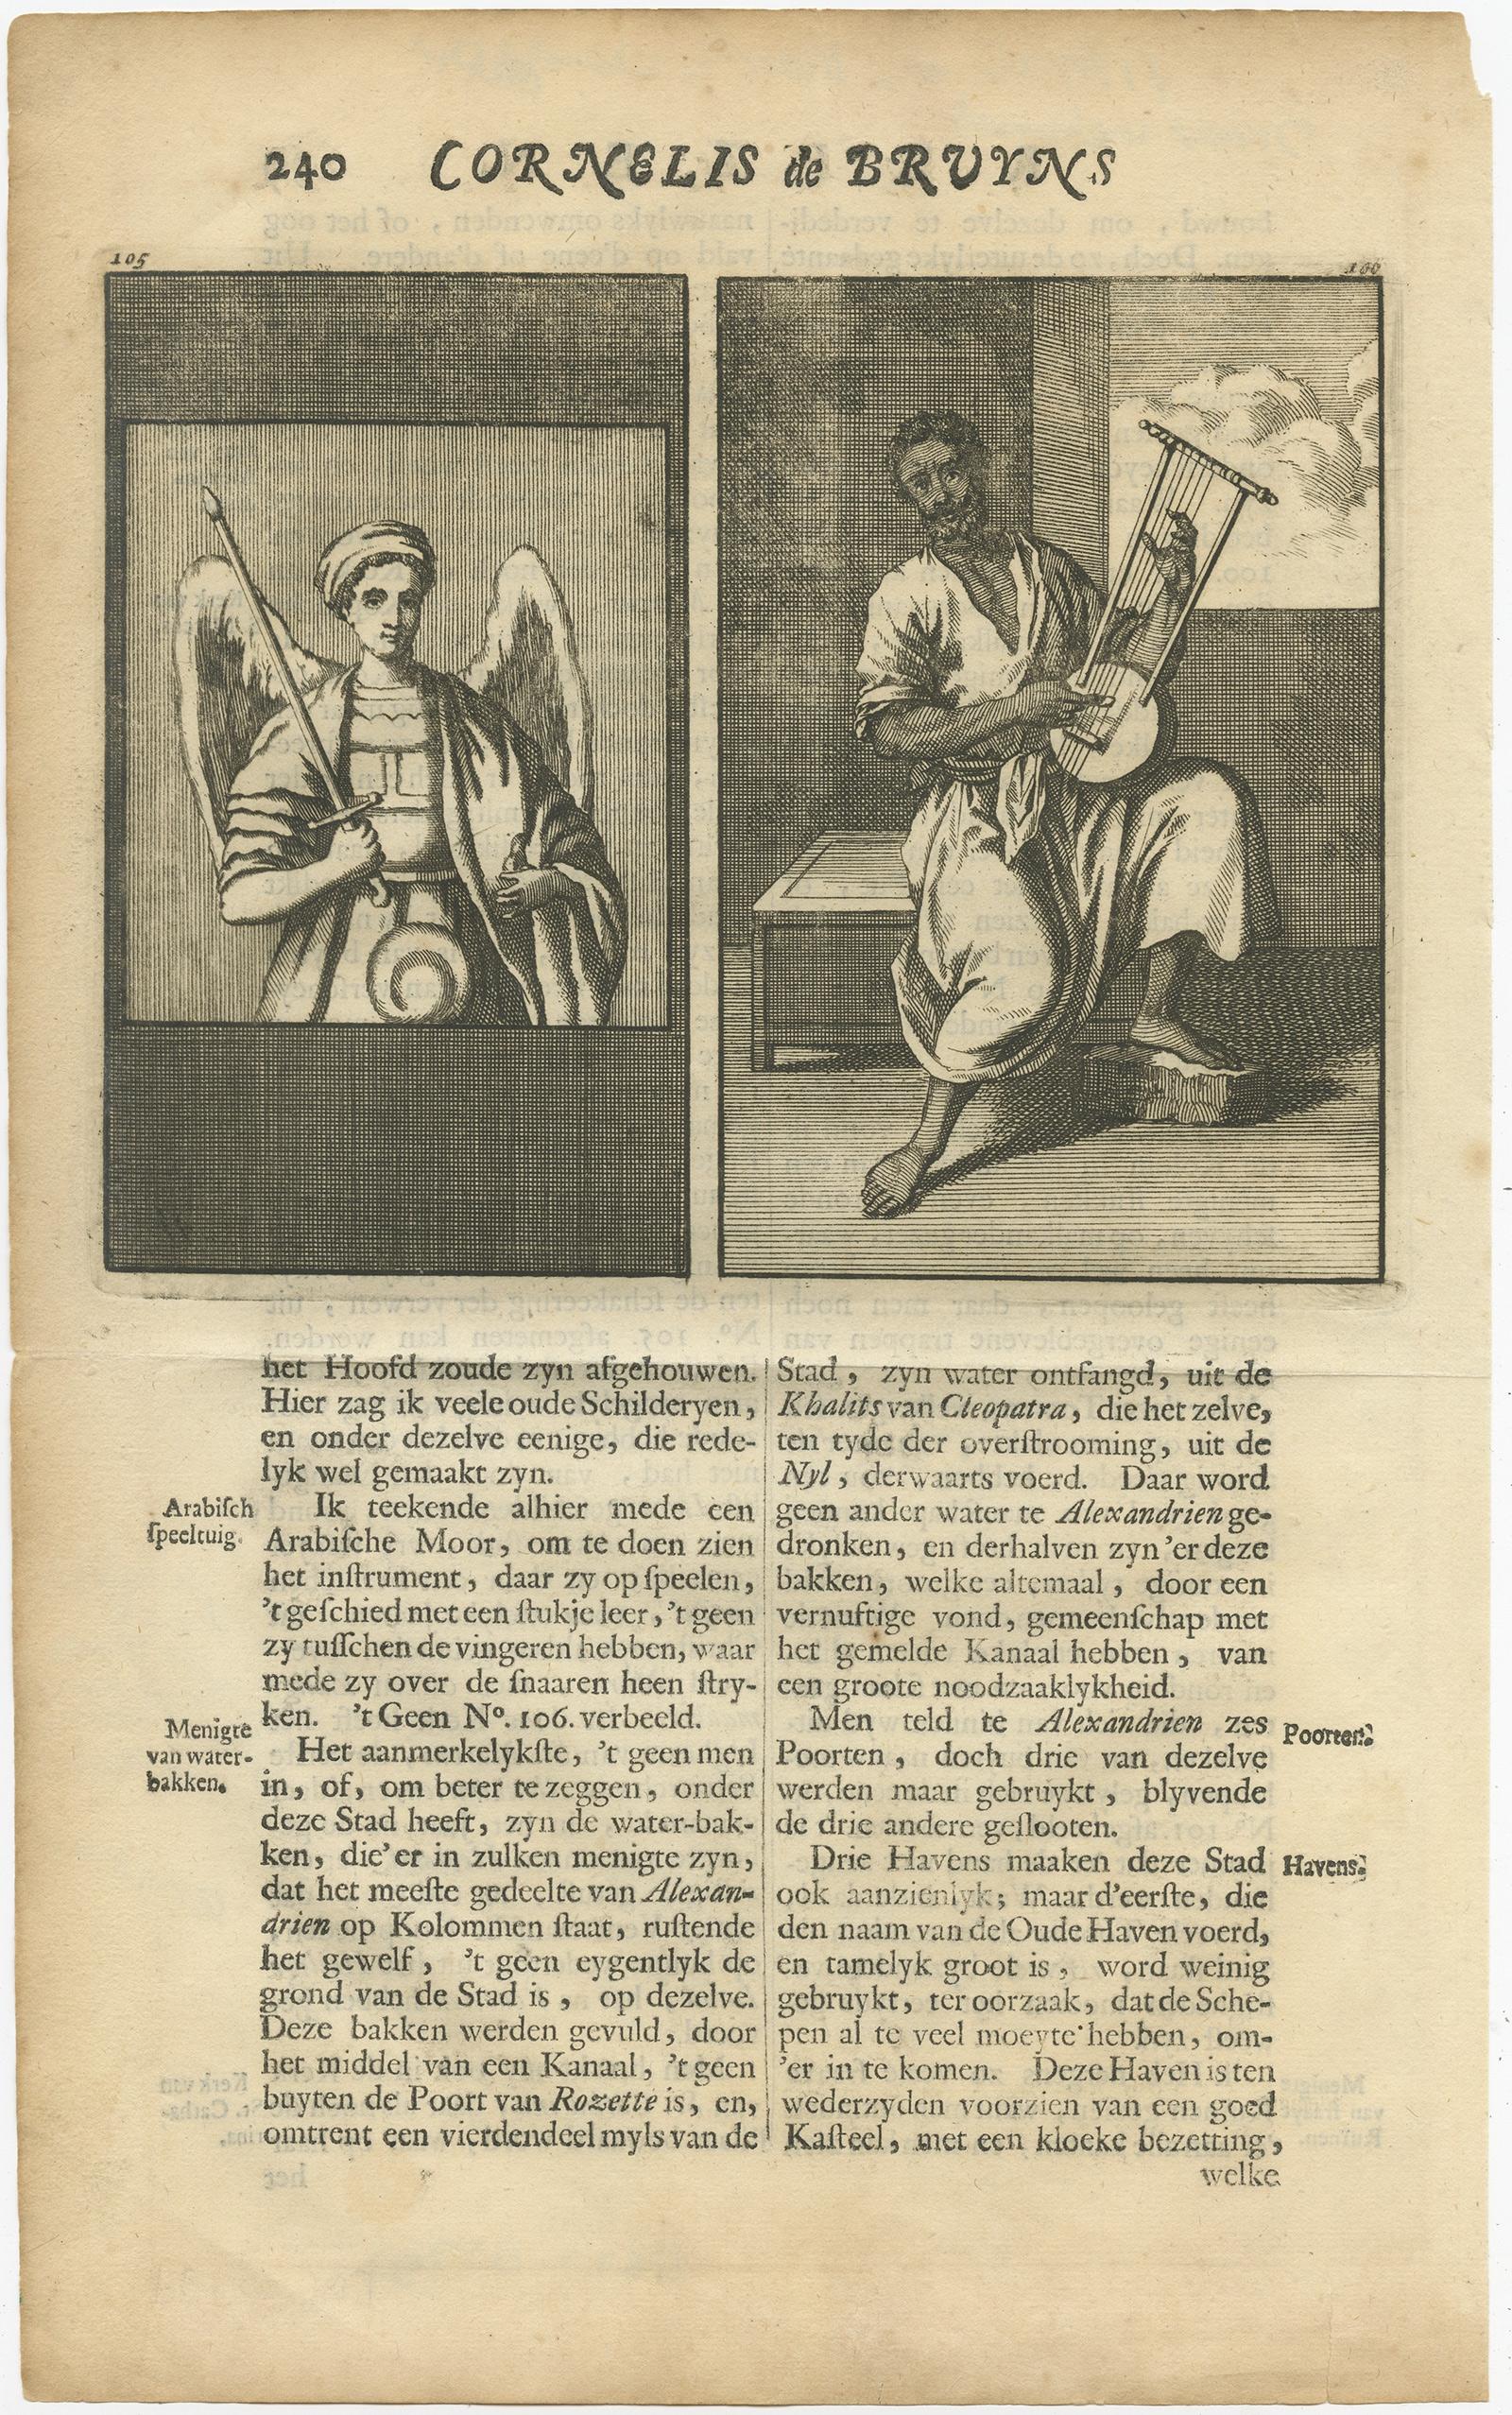 Untitled print of an Arab Moor man playing a stringed instrument 105: Mural in St. Marc's church: the left a painting of the Archangel Michael, said to be painted by S. Lucas. 

This print originates from 'Reizen van Cornelis de Bruyn, door de